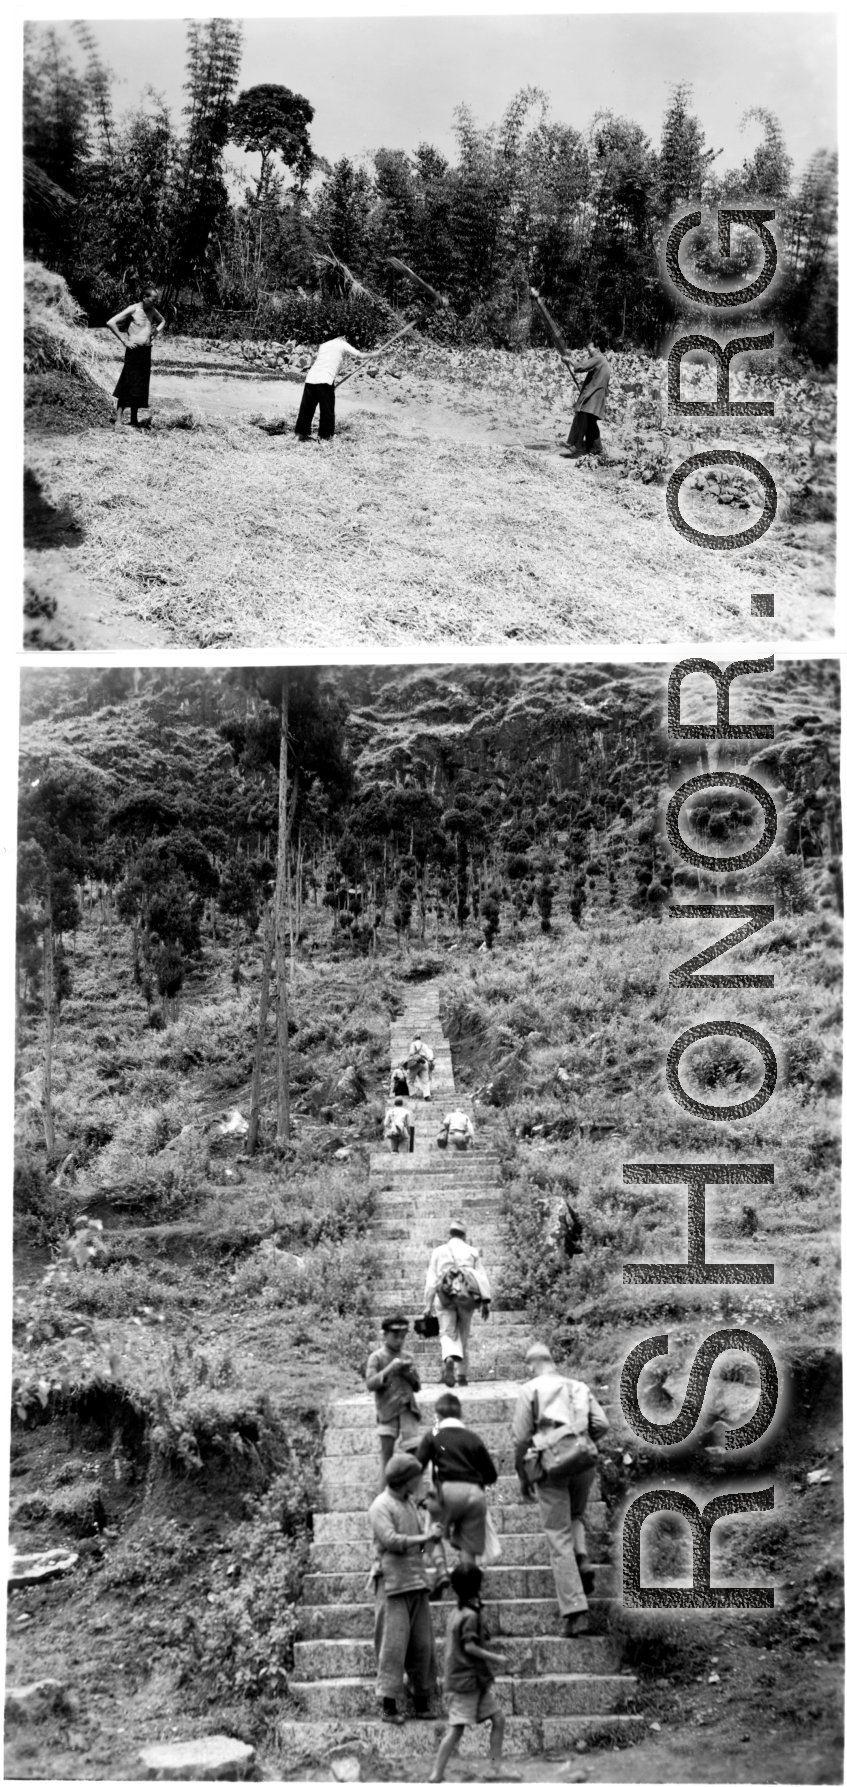 Chinese farmers threshing grain; GIs and Chinese children climbing stone walkway on a day outing. During WWII in China.  Photos from Dorothy Yuen Leuba.